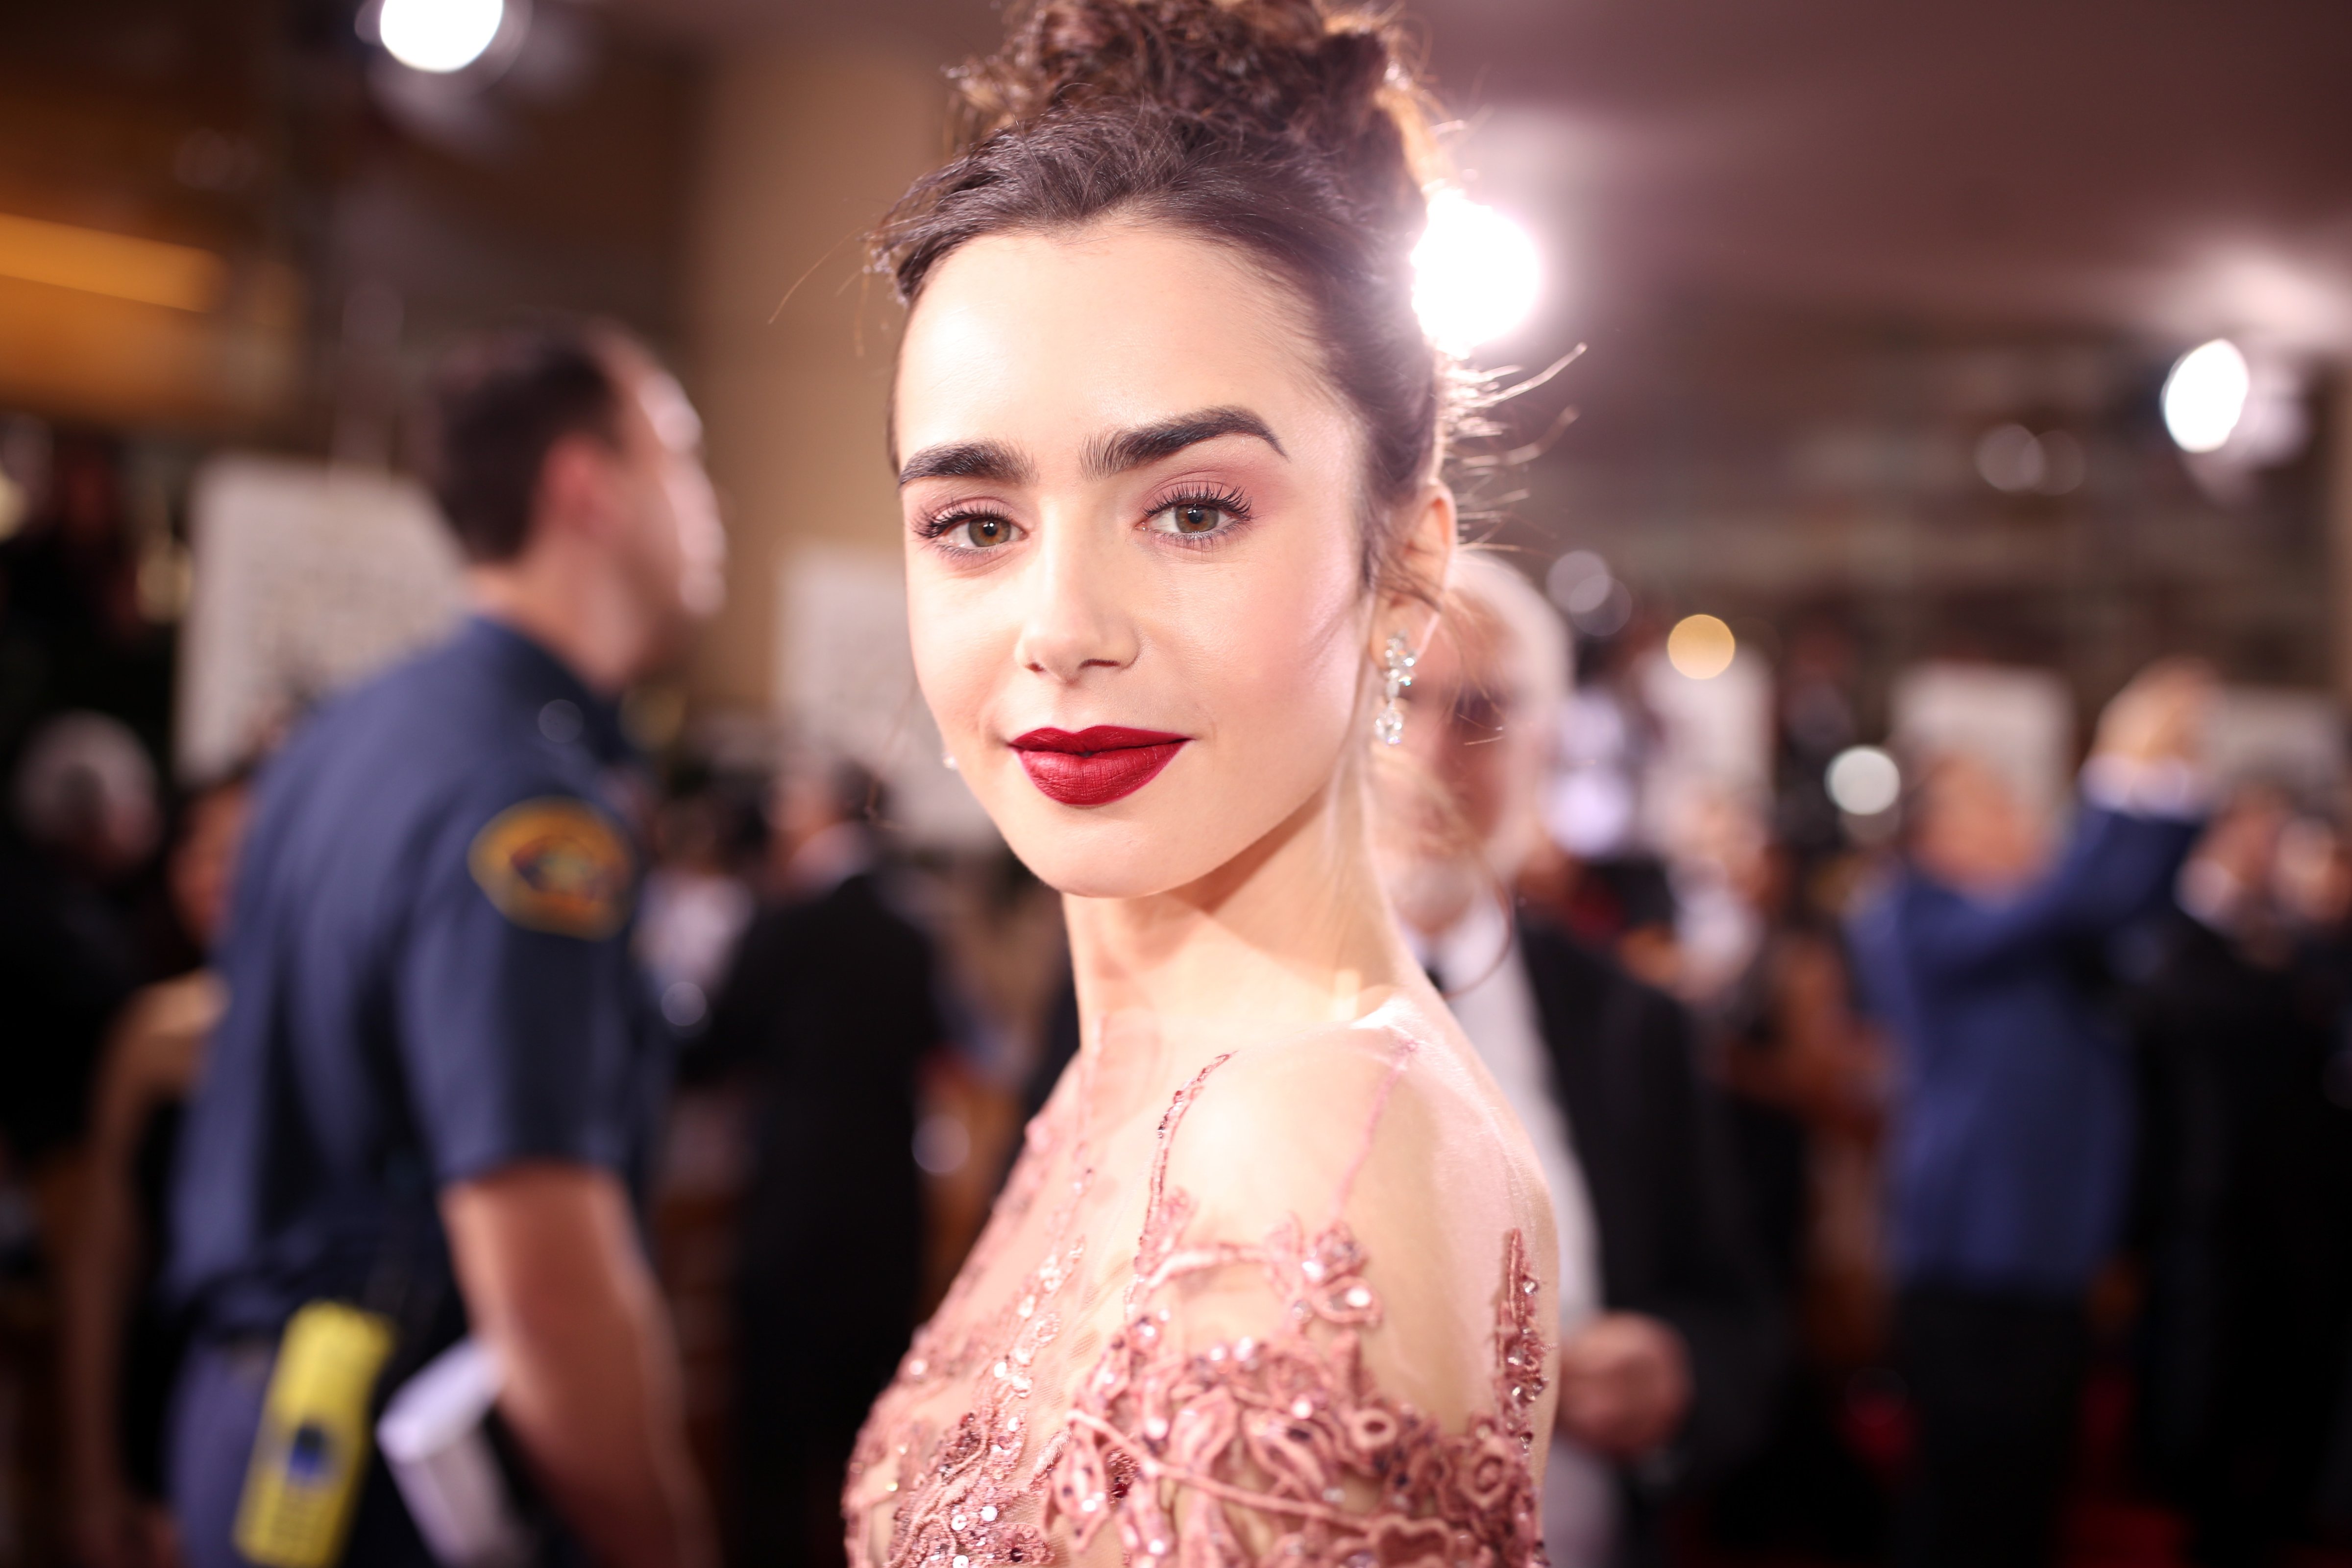 BEVERLY HILLS, CA - JANUARY 08:  74th ANNUAL GOLDEN GLOBE AWARDS -- Pictured:  Actress Lily Collins arrives to the 74th Annual Golden Globe Awards held at the Beverly Hilton Hotel on January 8, 2017.  (Photo by Christopher Polk/NBC/NBCU Photo Bank via Getty Images) (Christopher Polk/NBC—NBCU Photo Bank via Getty Images via Getty Images)